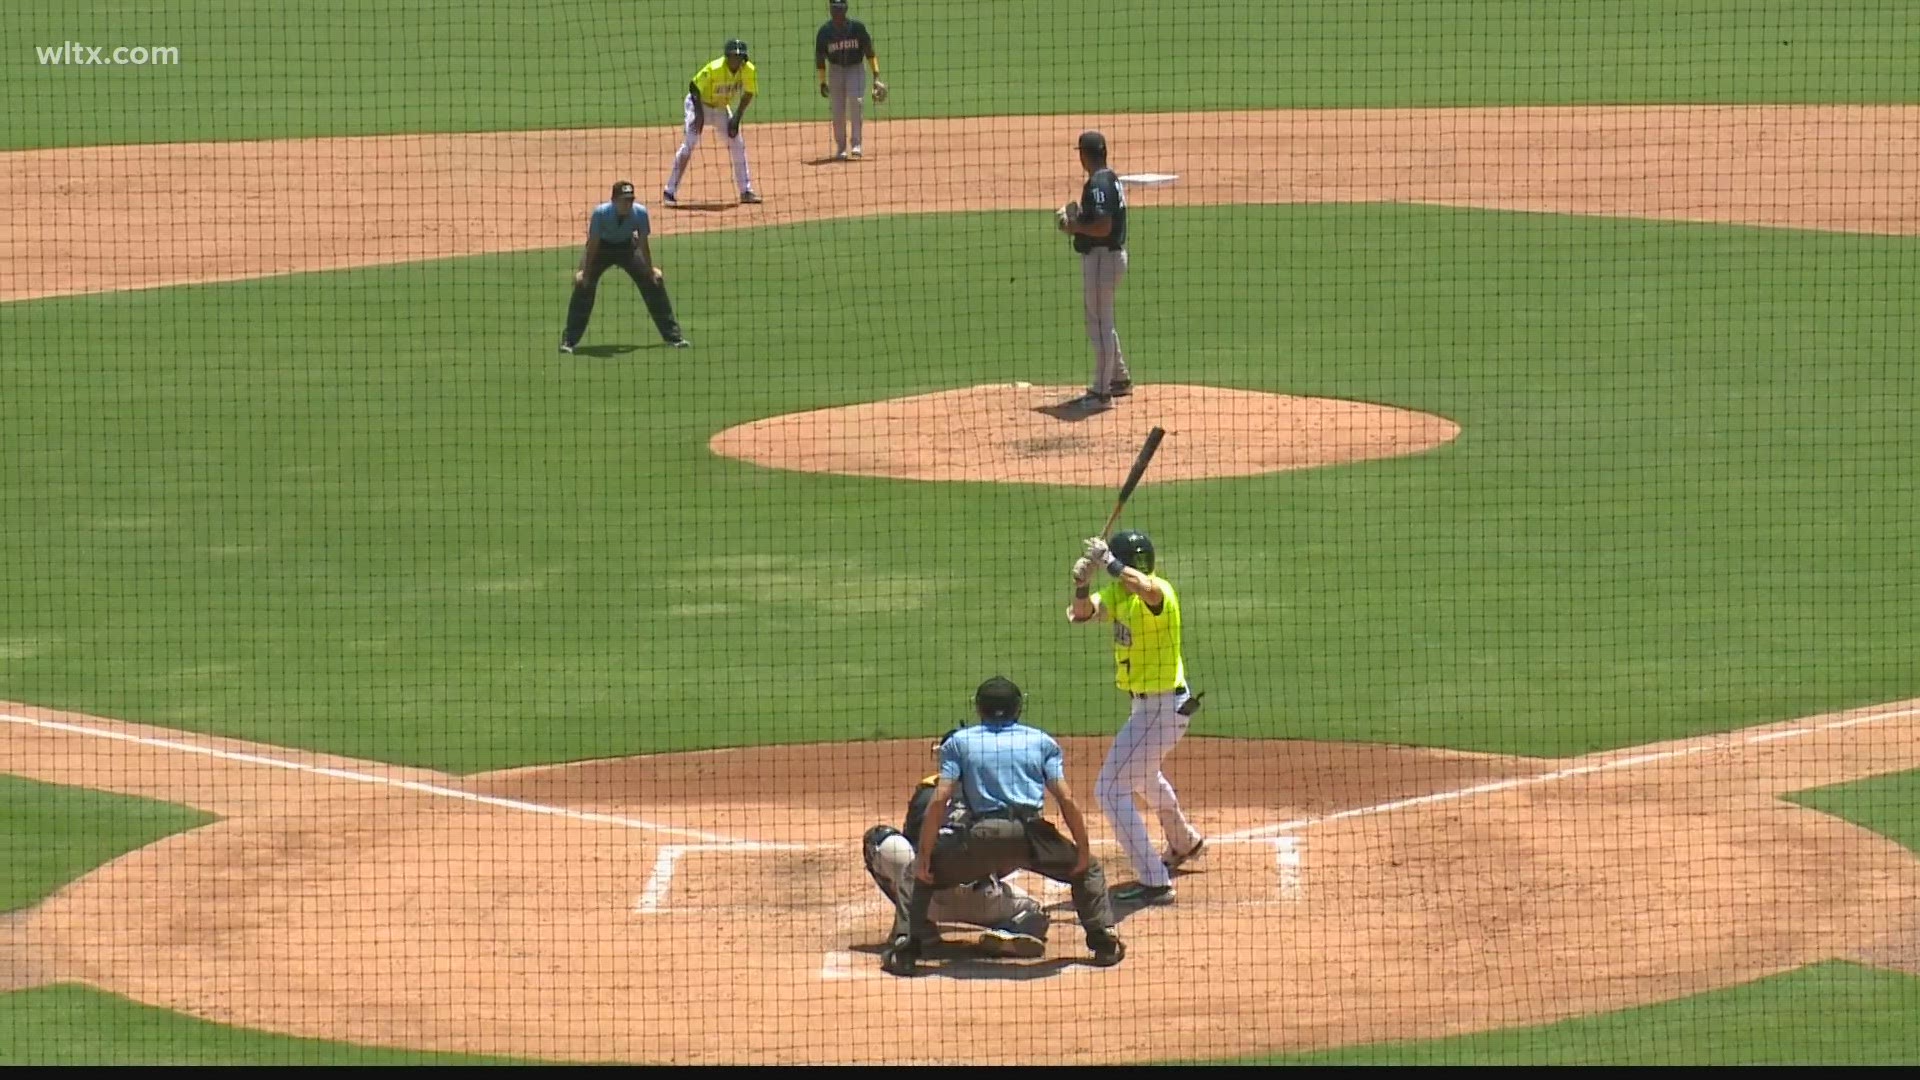 Highlights from Wednesday's game at Segra Park between the Fireflies and Charleston Riverdogs.